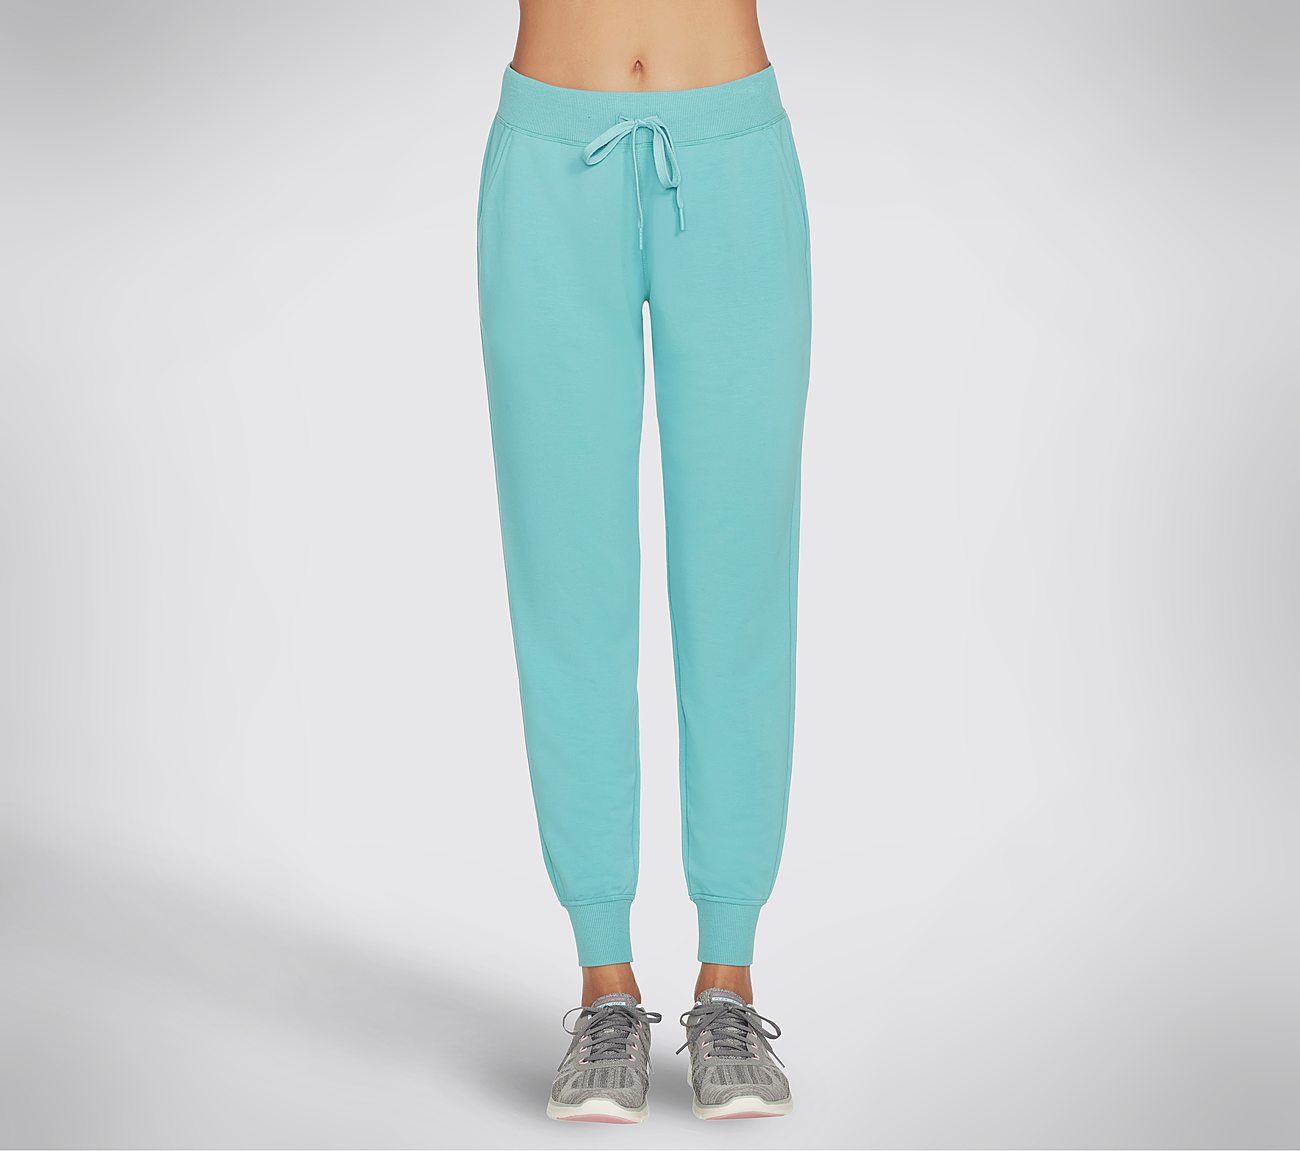 RESTFUL JOGGER, TURQUOISE Apparels Lateral View